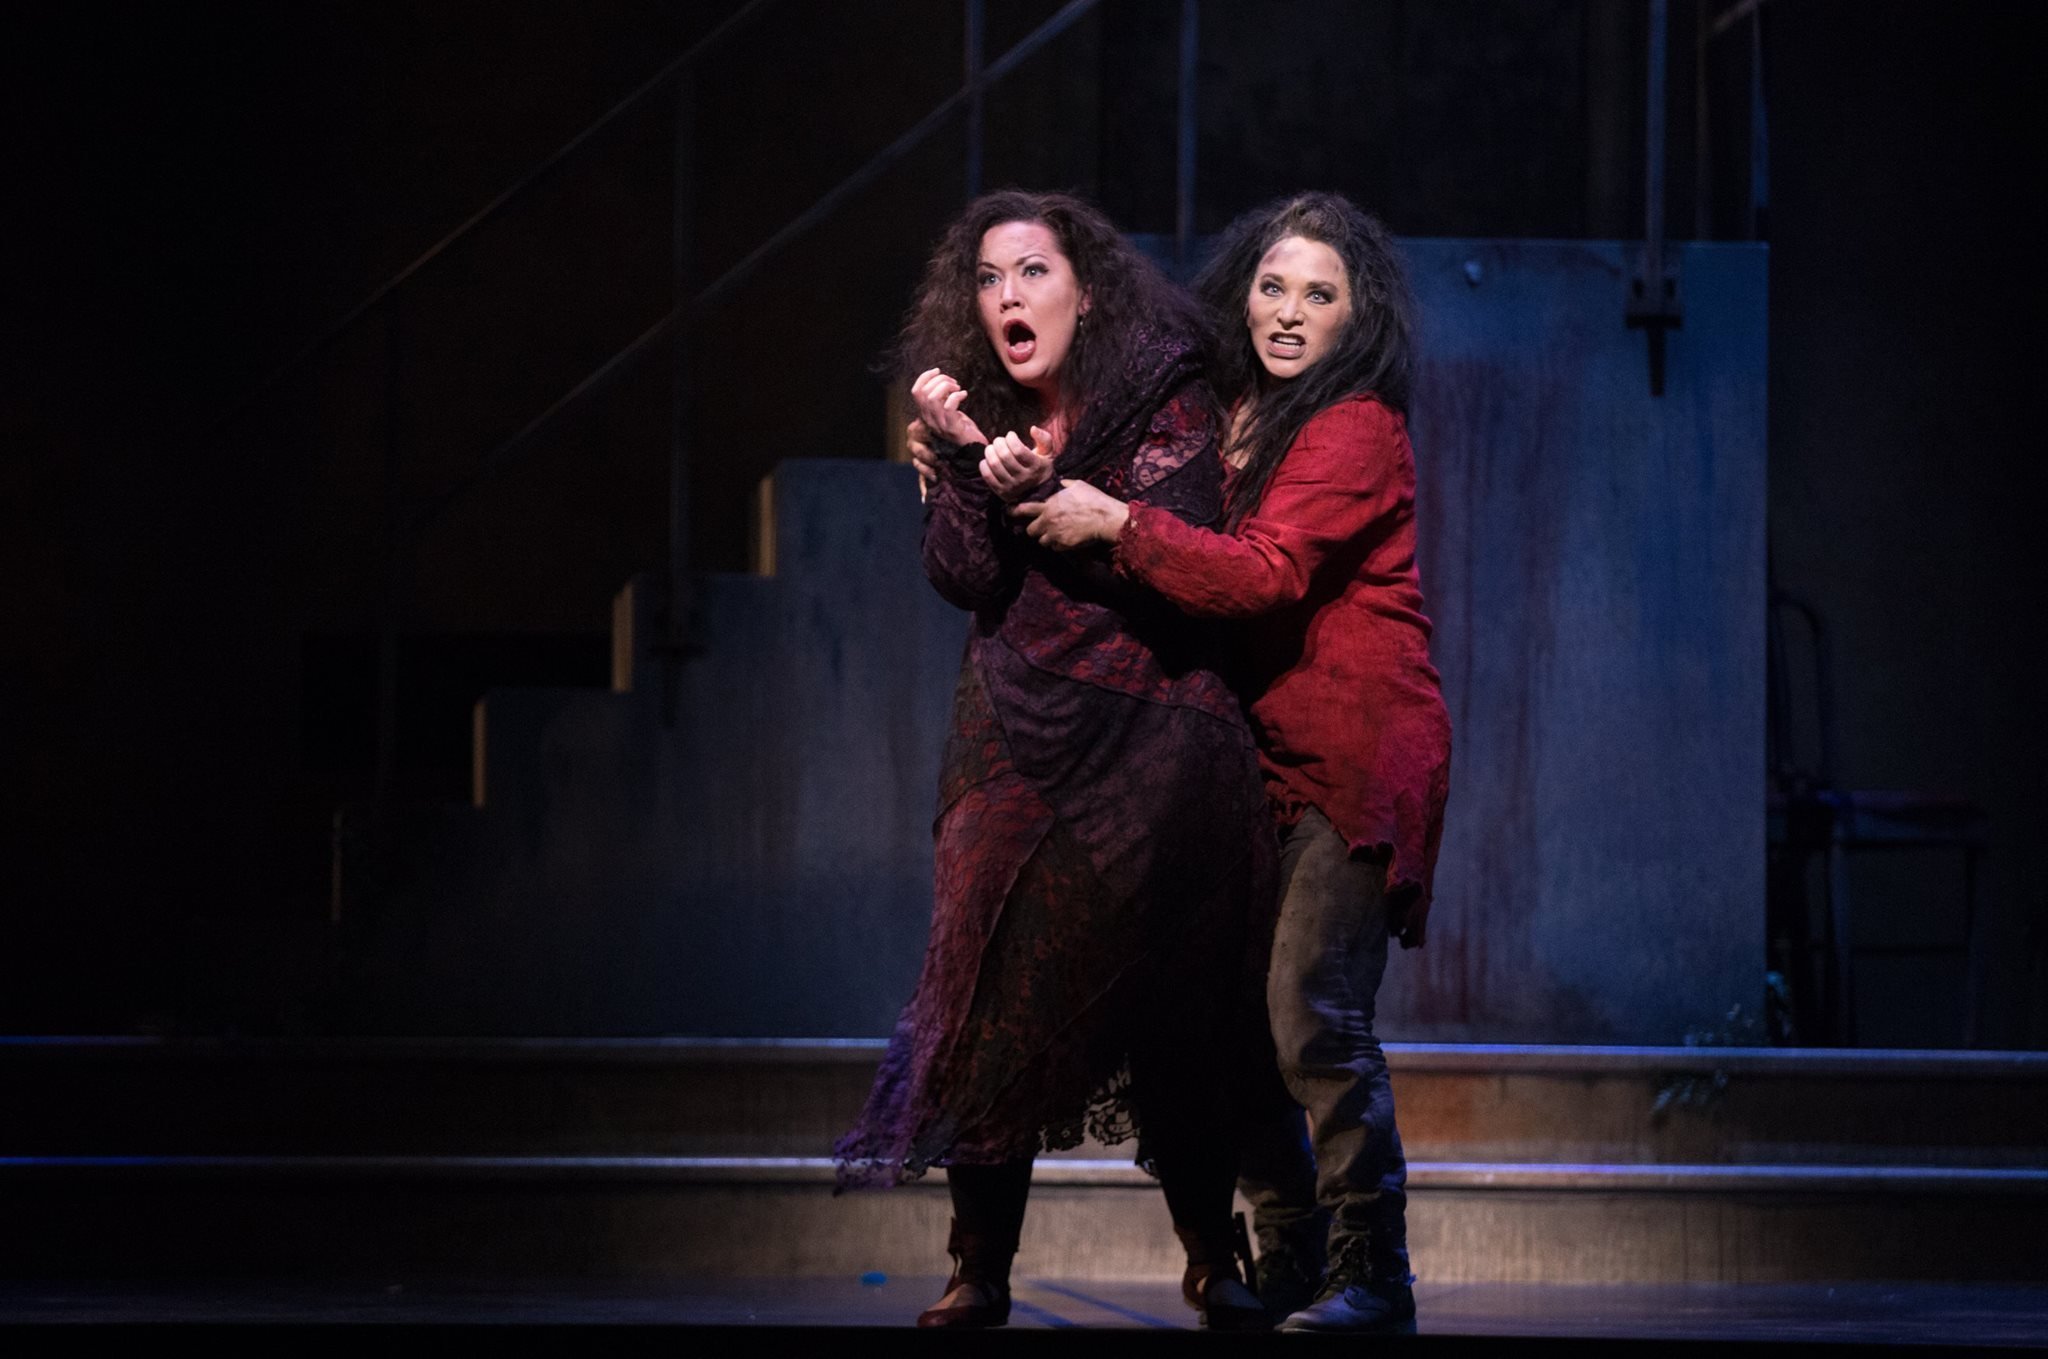  “Tracy Cantin, who played Elektra’s sister, absolutely stole every scene she was in. It was more than just her glistening bright voice—it was the emotive and descriptive passion that simply exuded from every line that she sang. Coupled with her very